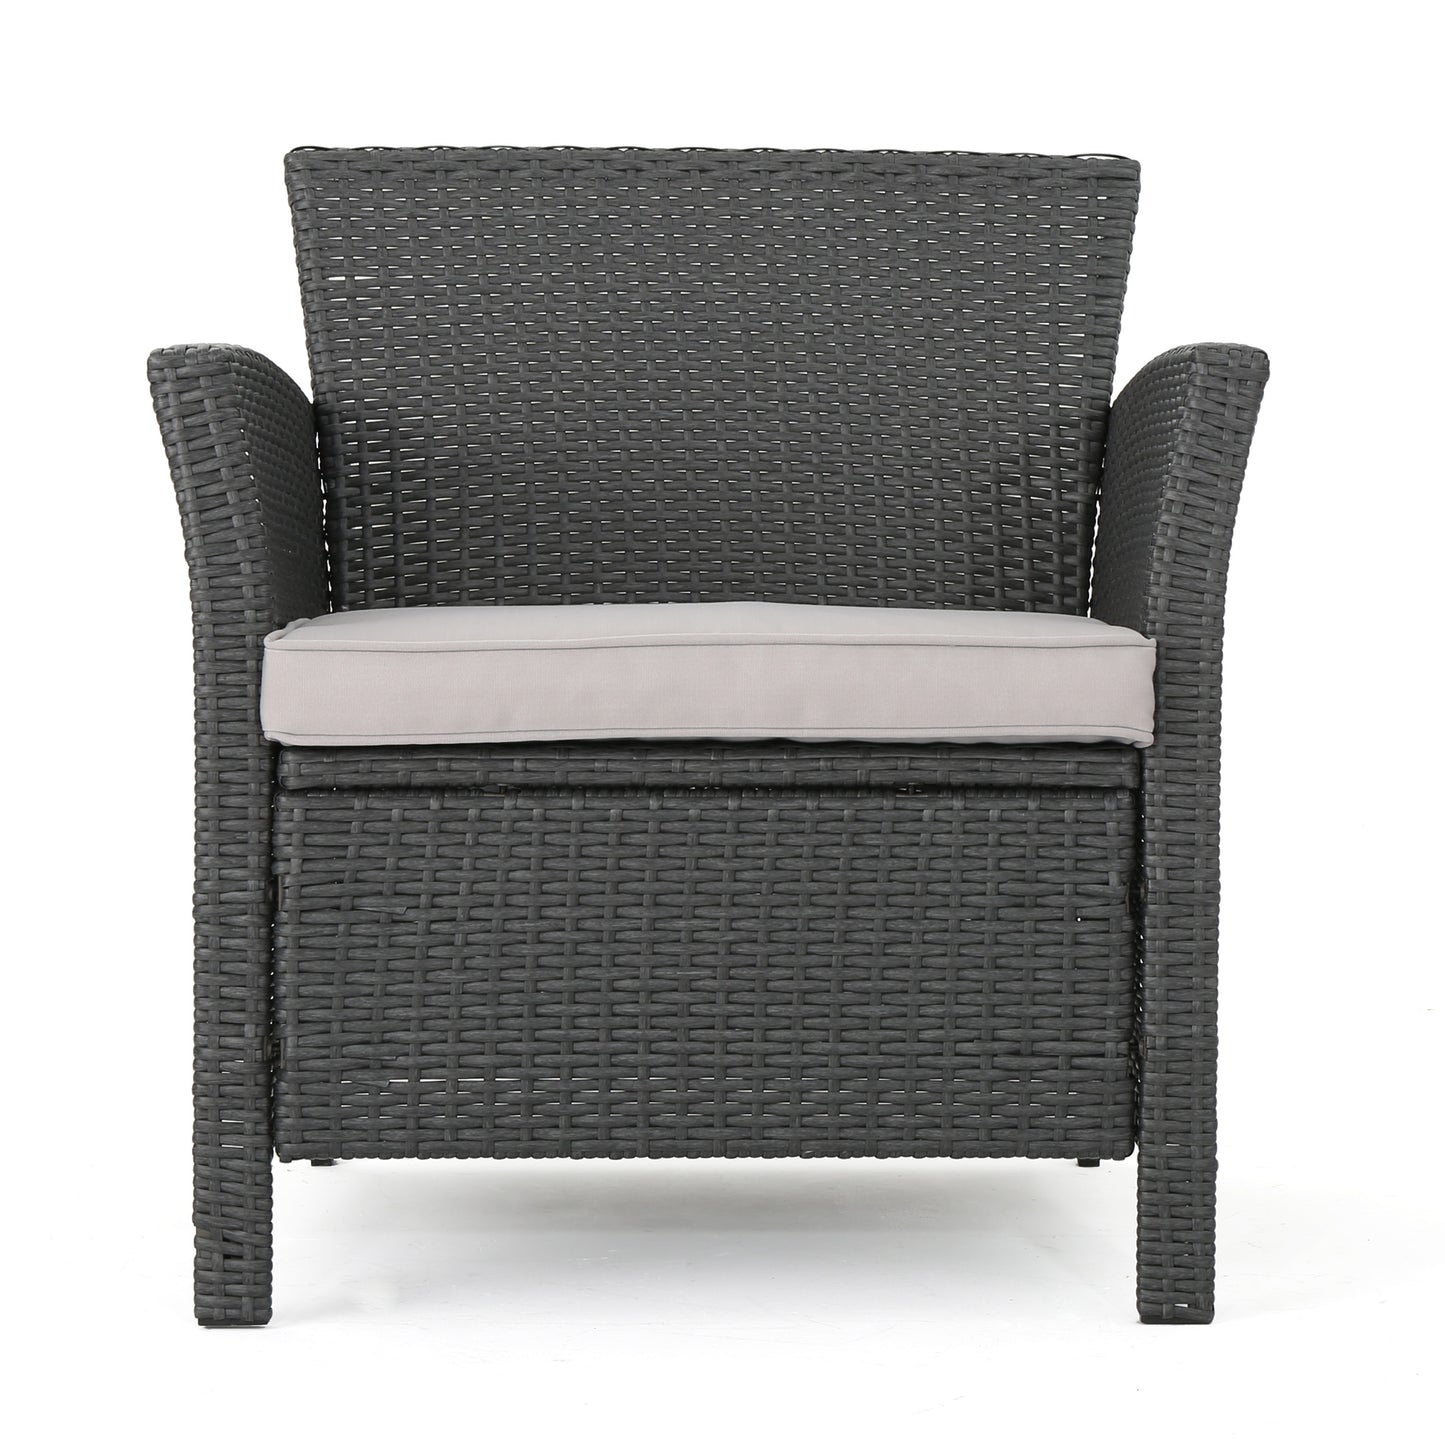 Tori Outdoor Wicker Club Chairs with Water-Resistant Cushions (Set of 2)